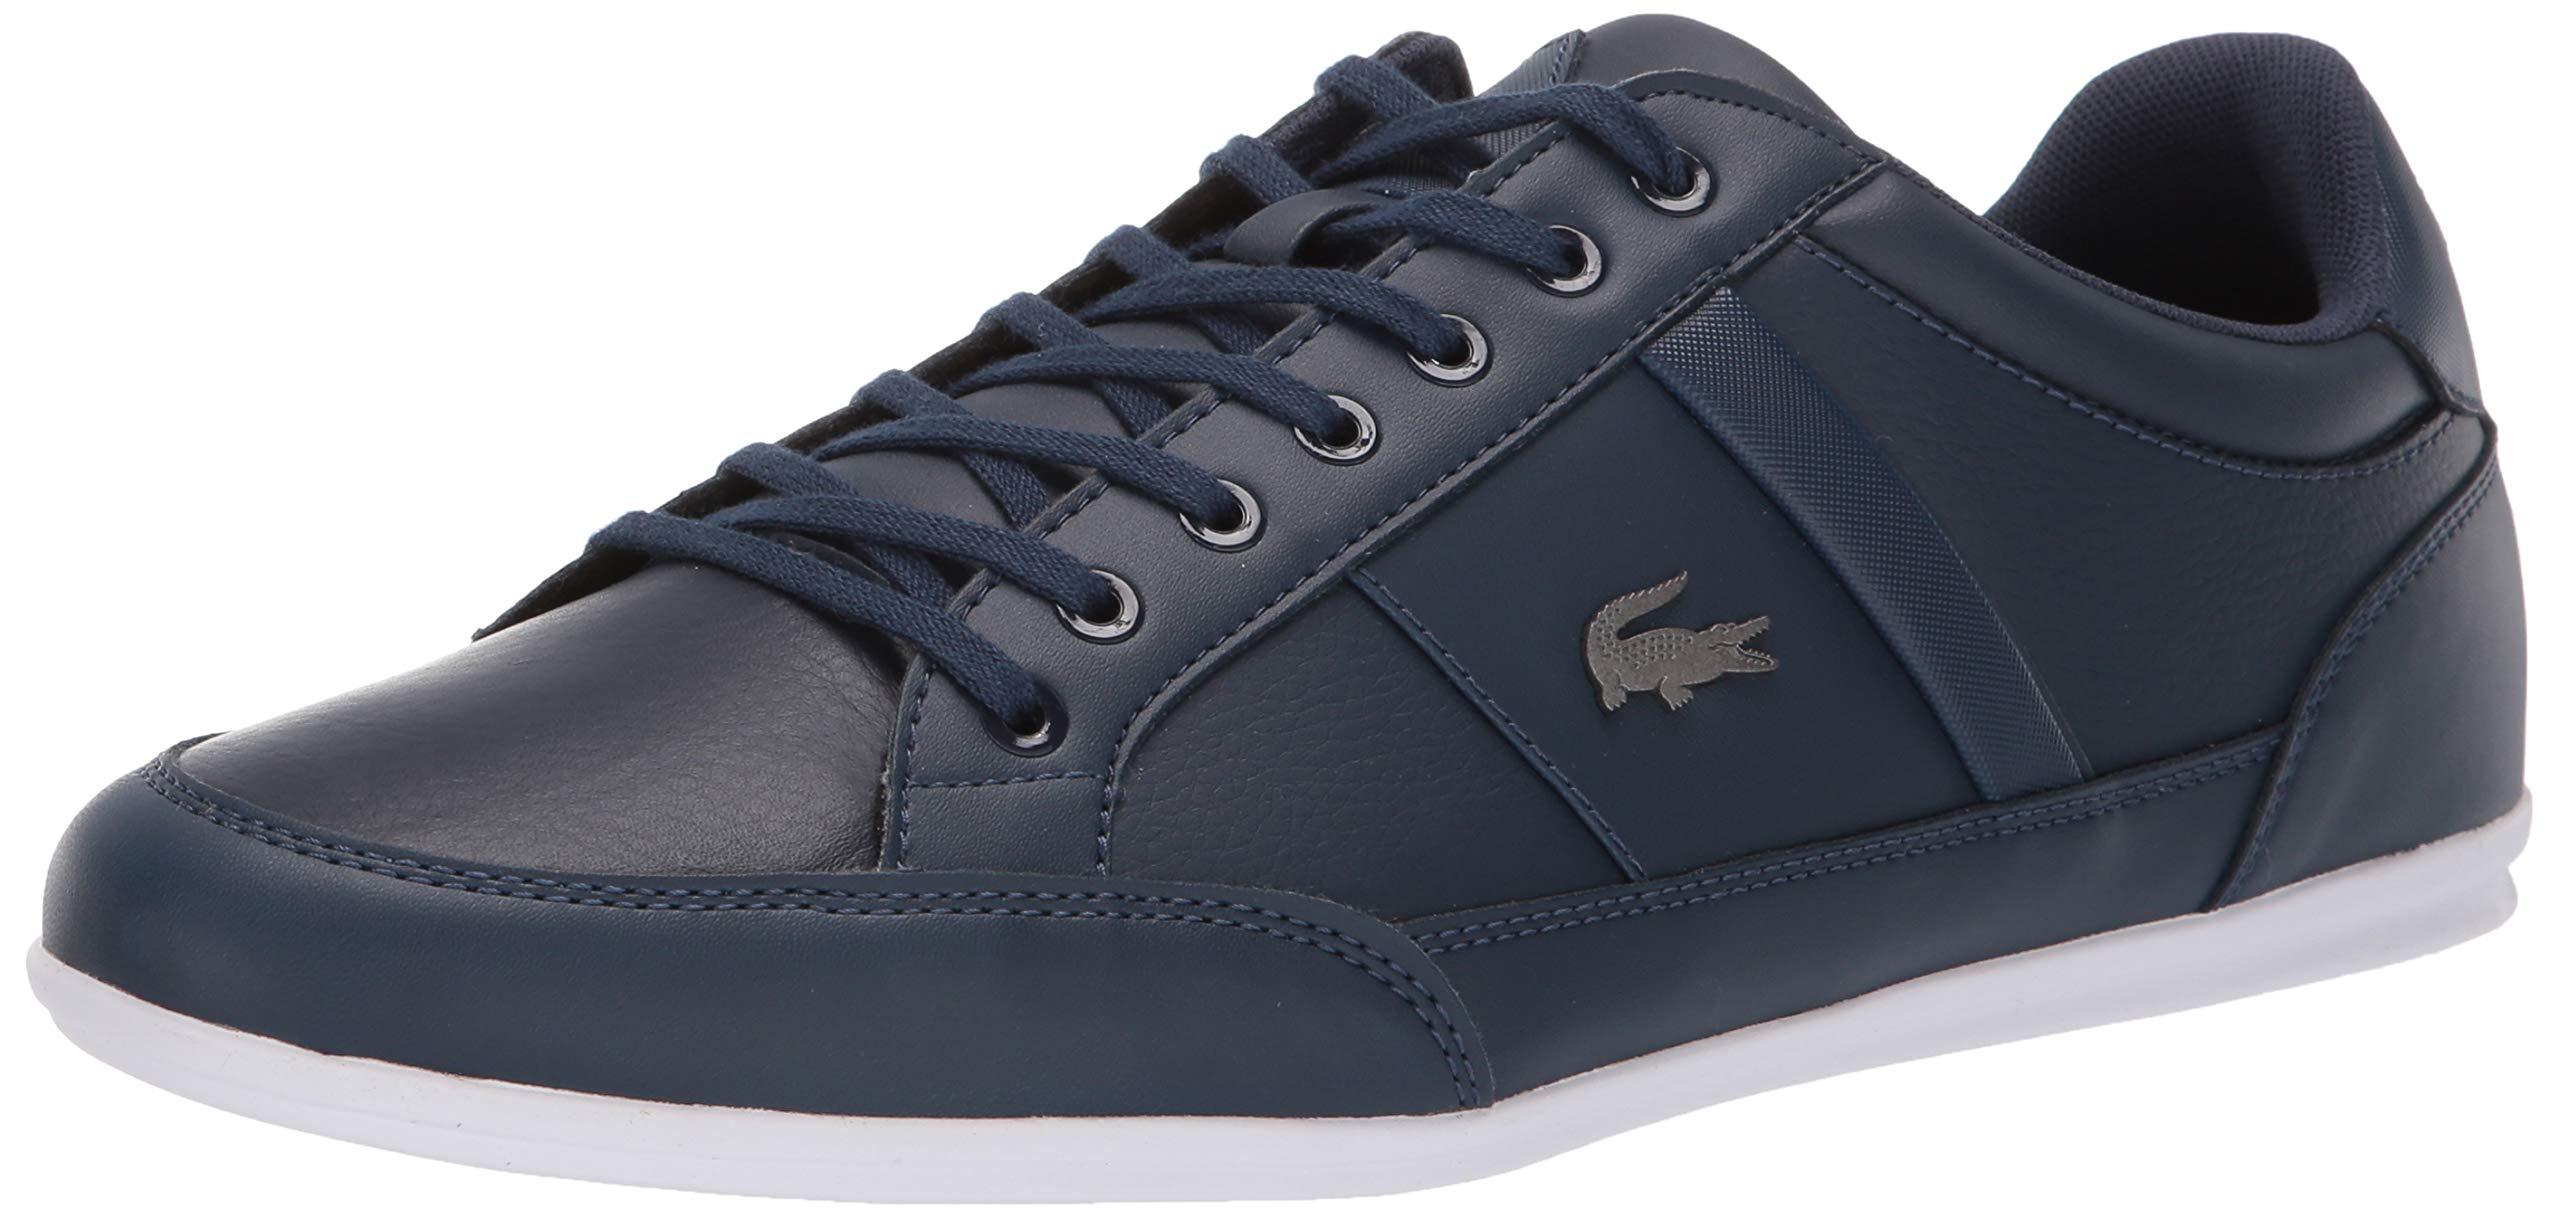 Lacoste Leather S Chaymon Bl 1 Casual Sneakers, in Navy/White (Blue ...